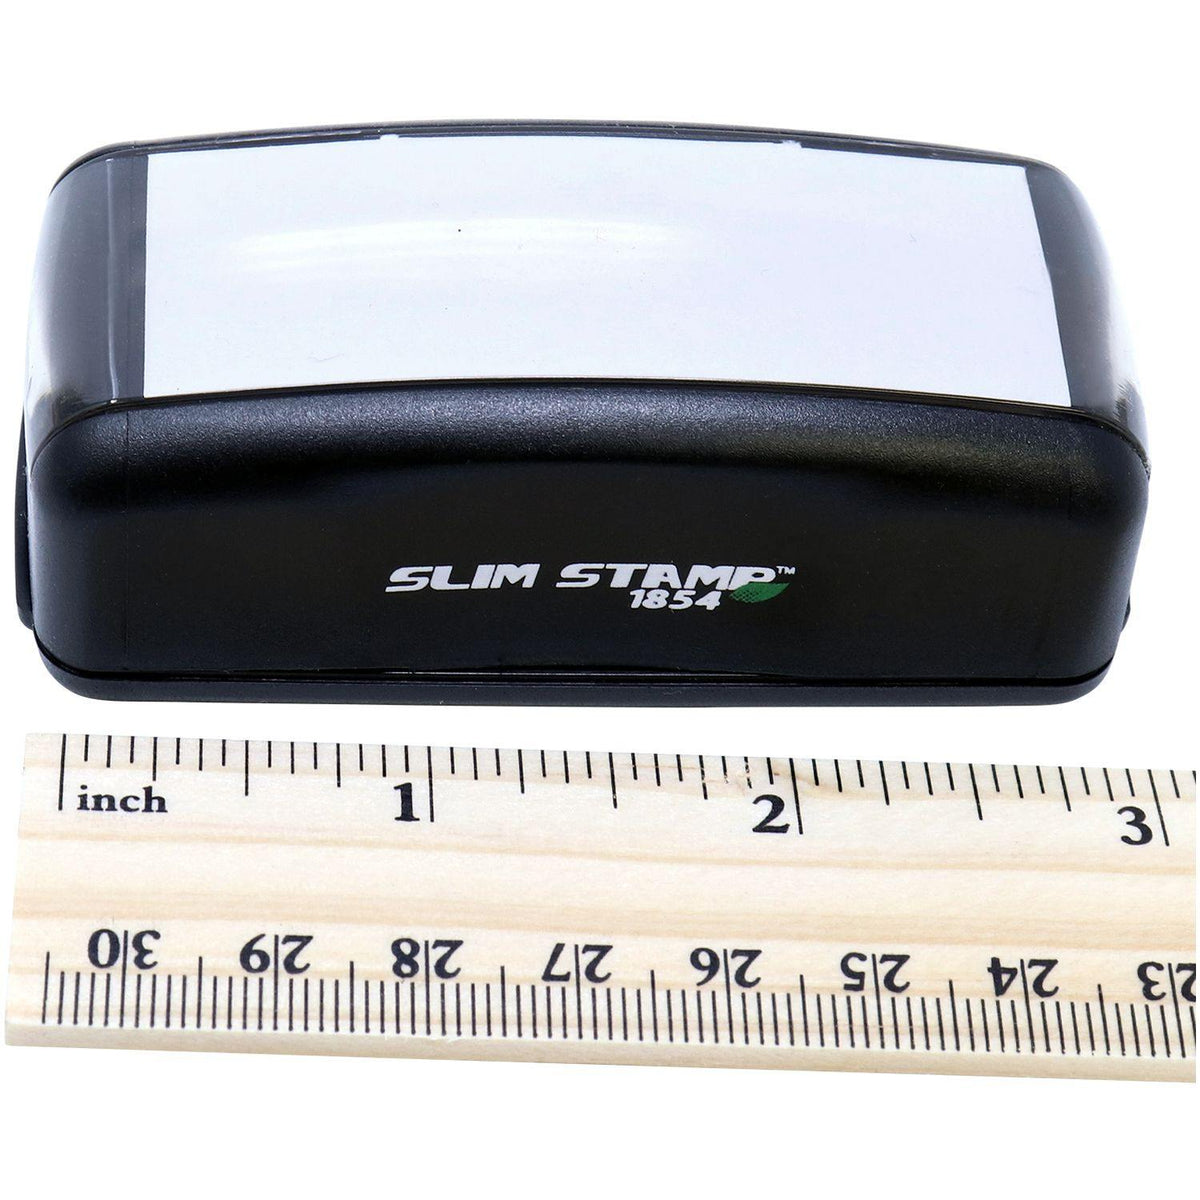 Measurement Large Pre Inked Closed Stamp with Ruler